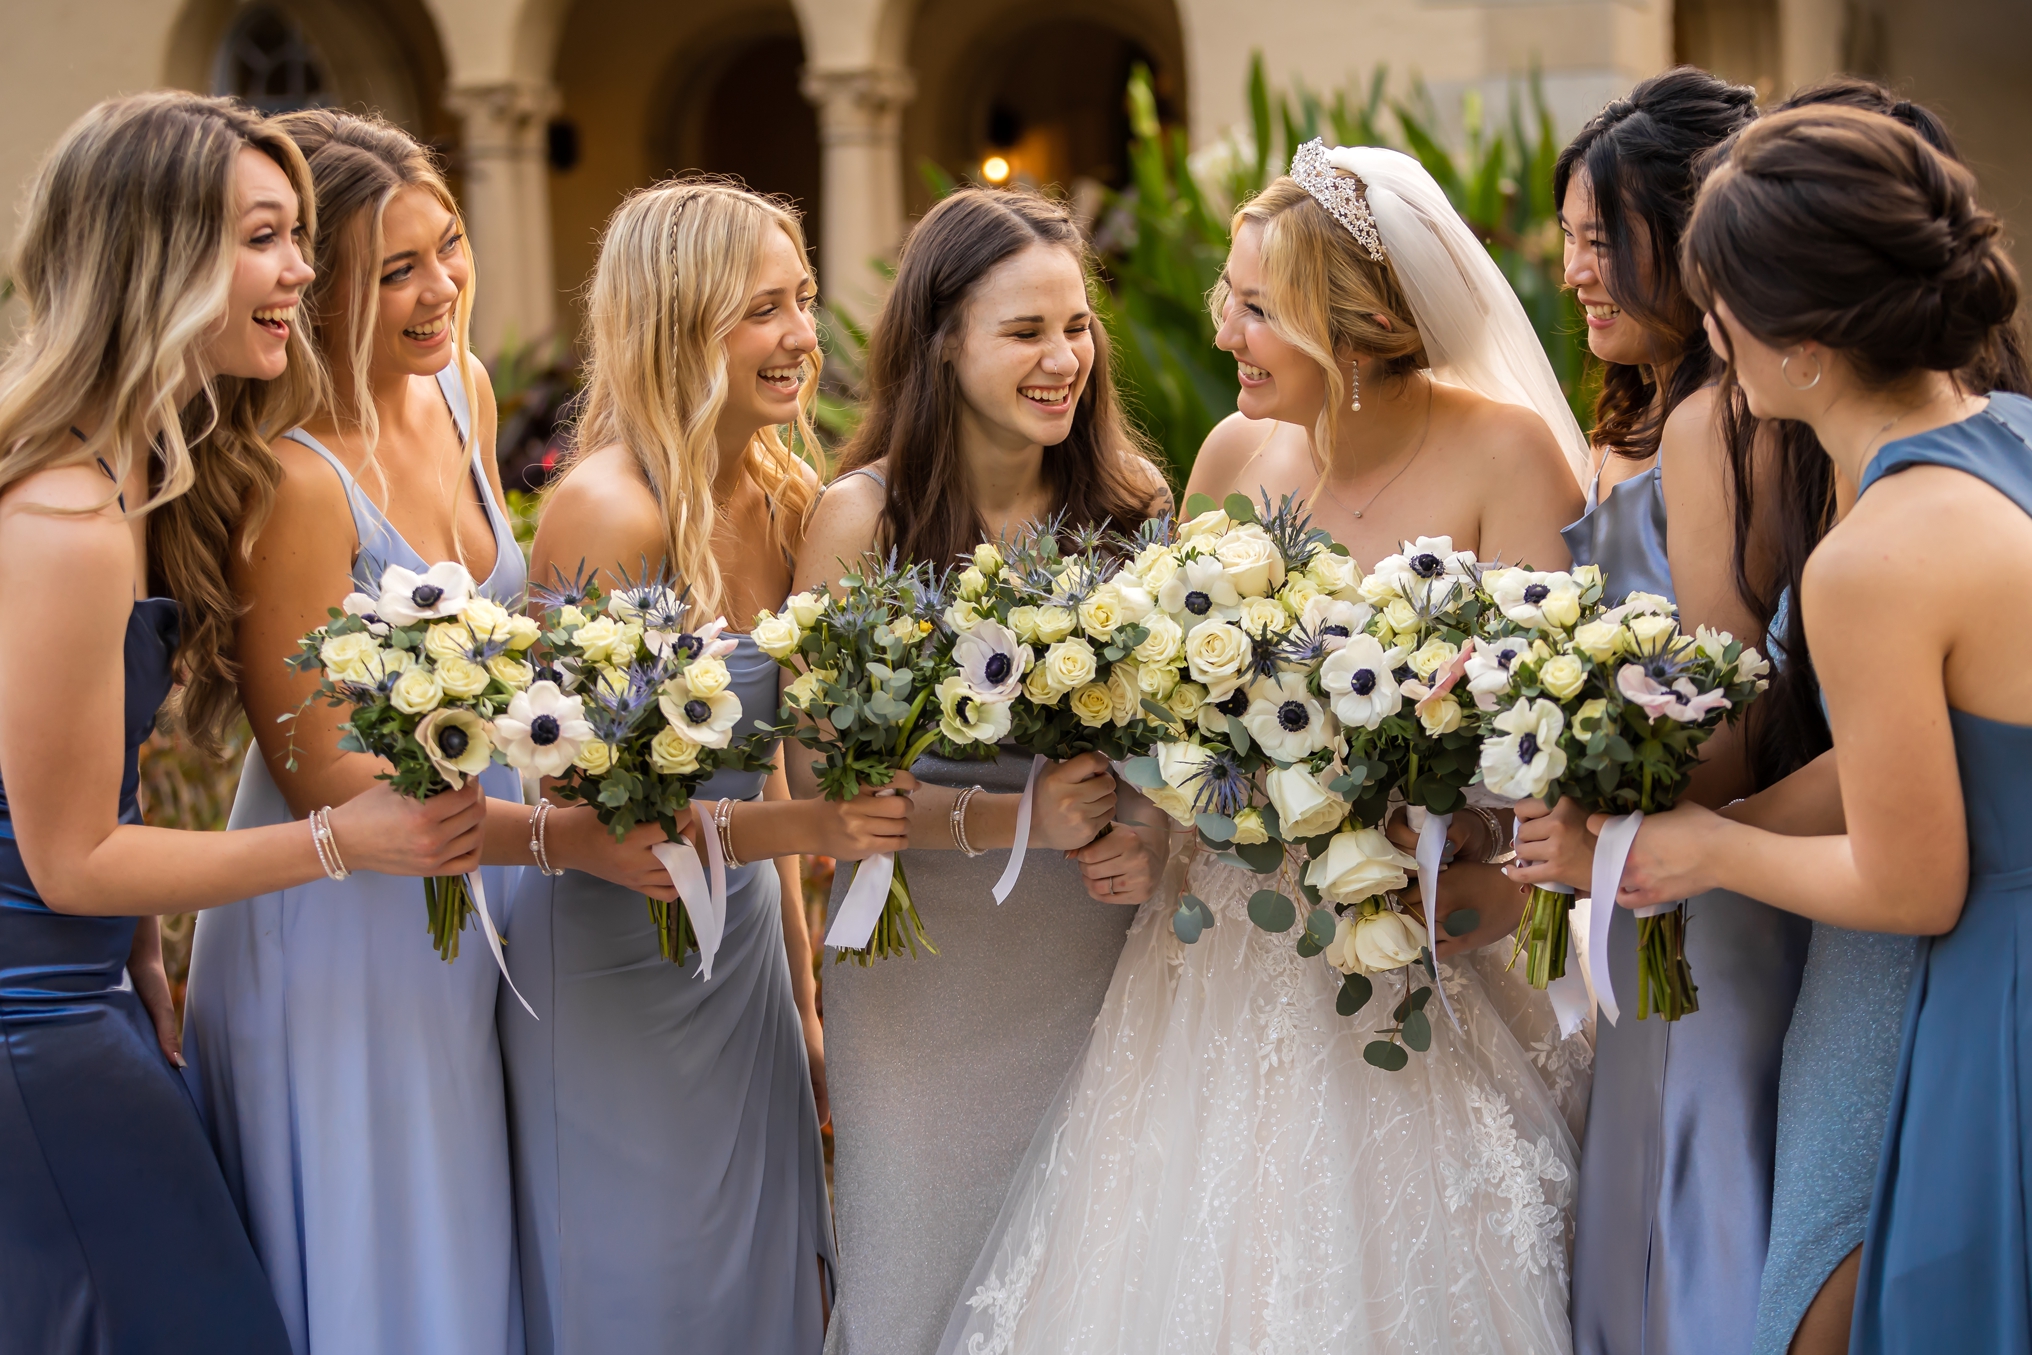 Bride Morgan laughing with her bridesmaids out front of the Powel Crosley Estate.